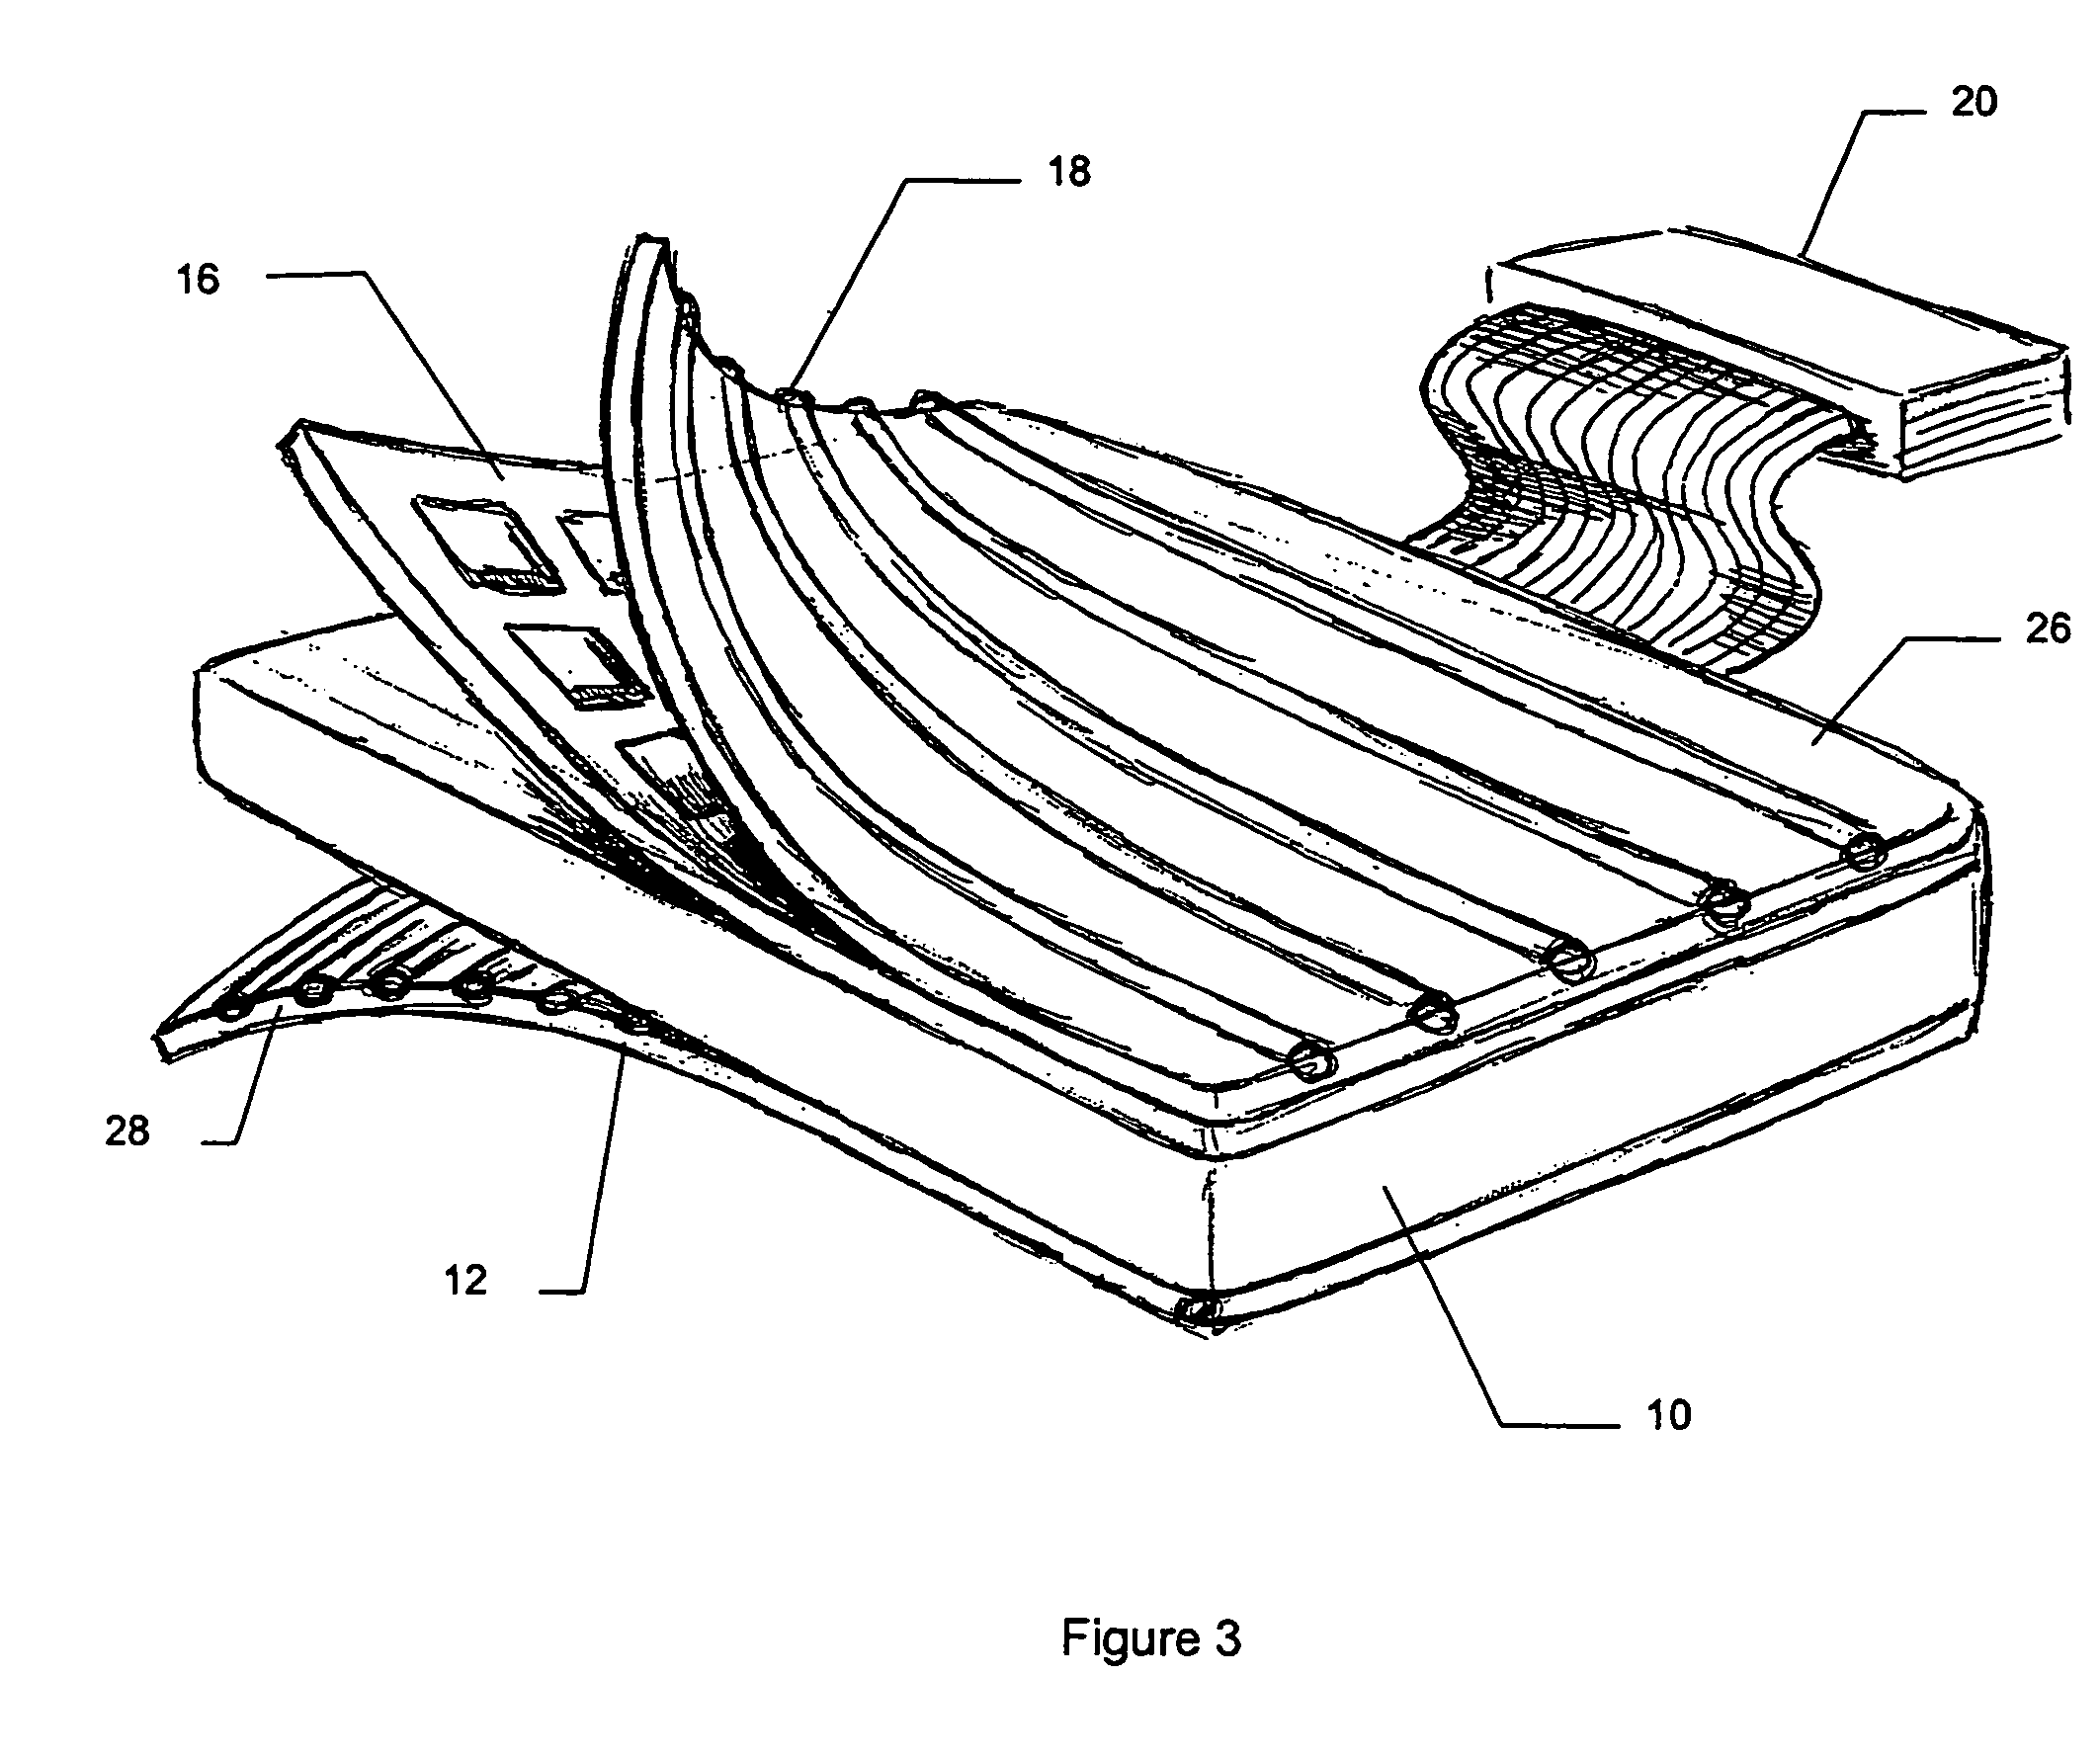 Apparatus for hyperthermia and brachytherapy delivery